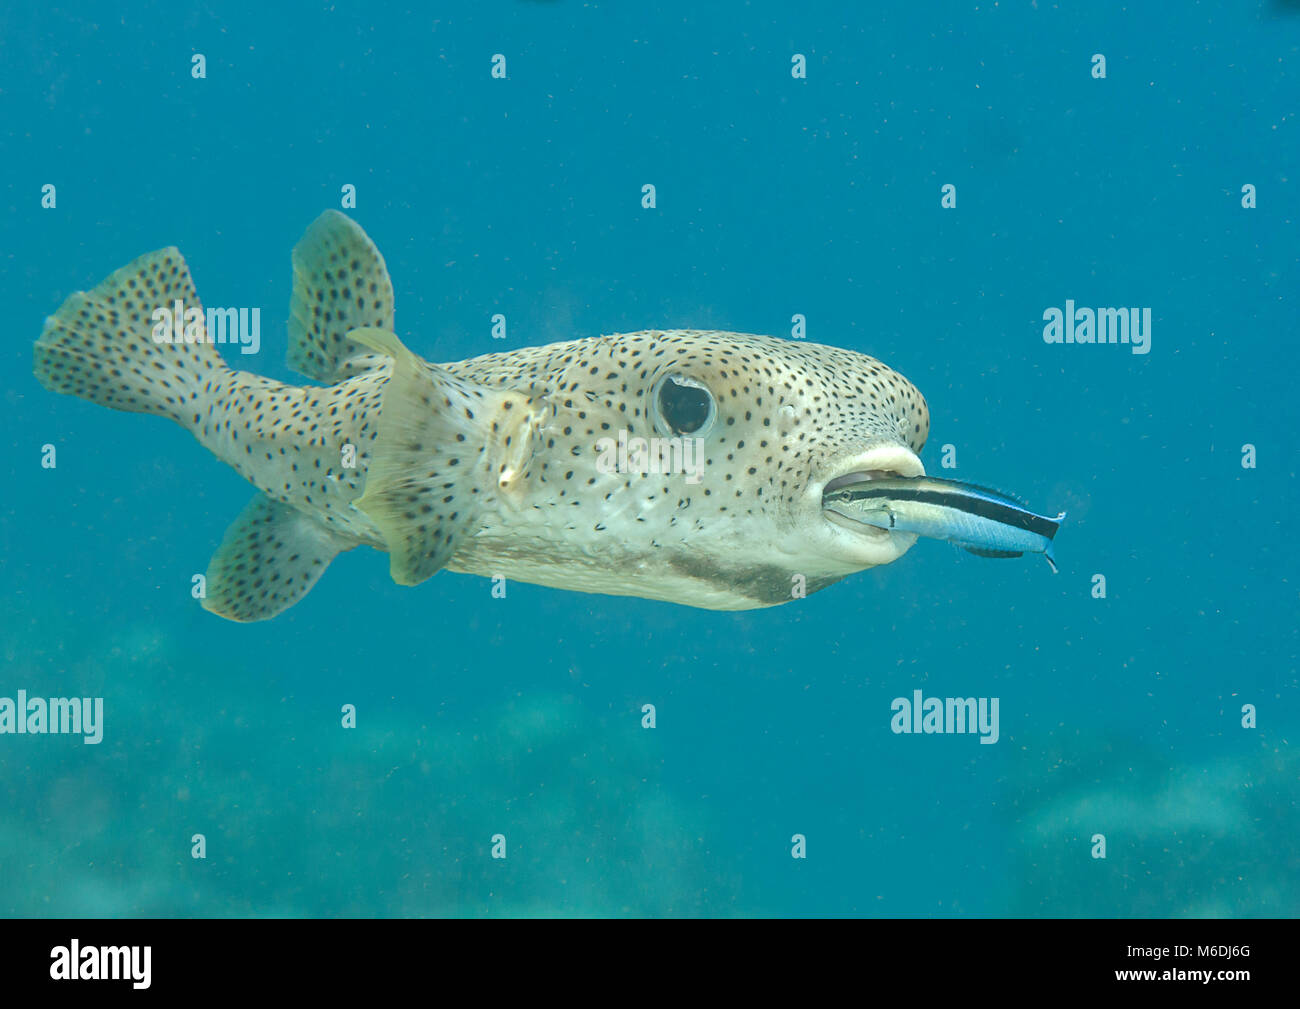 Porcupine pufferfish (diodon hystrix) being cleaned by cleaner fish (labroides dimidiatus) at cleaning station , Bali, Indonesia Stock Photo